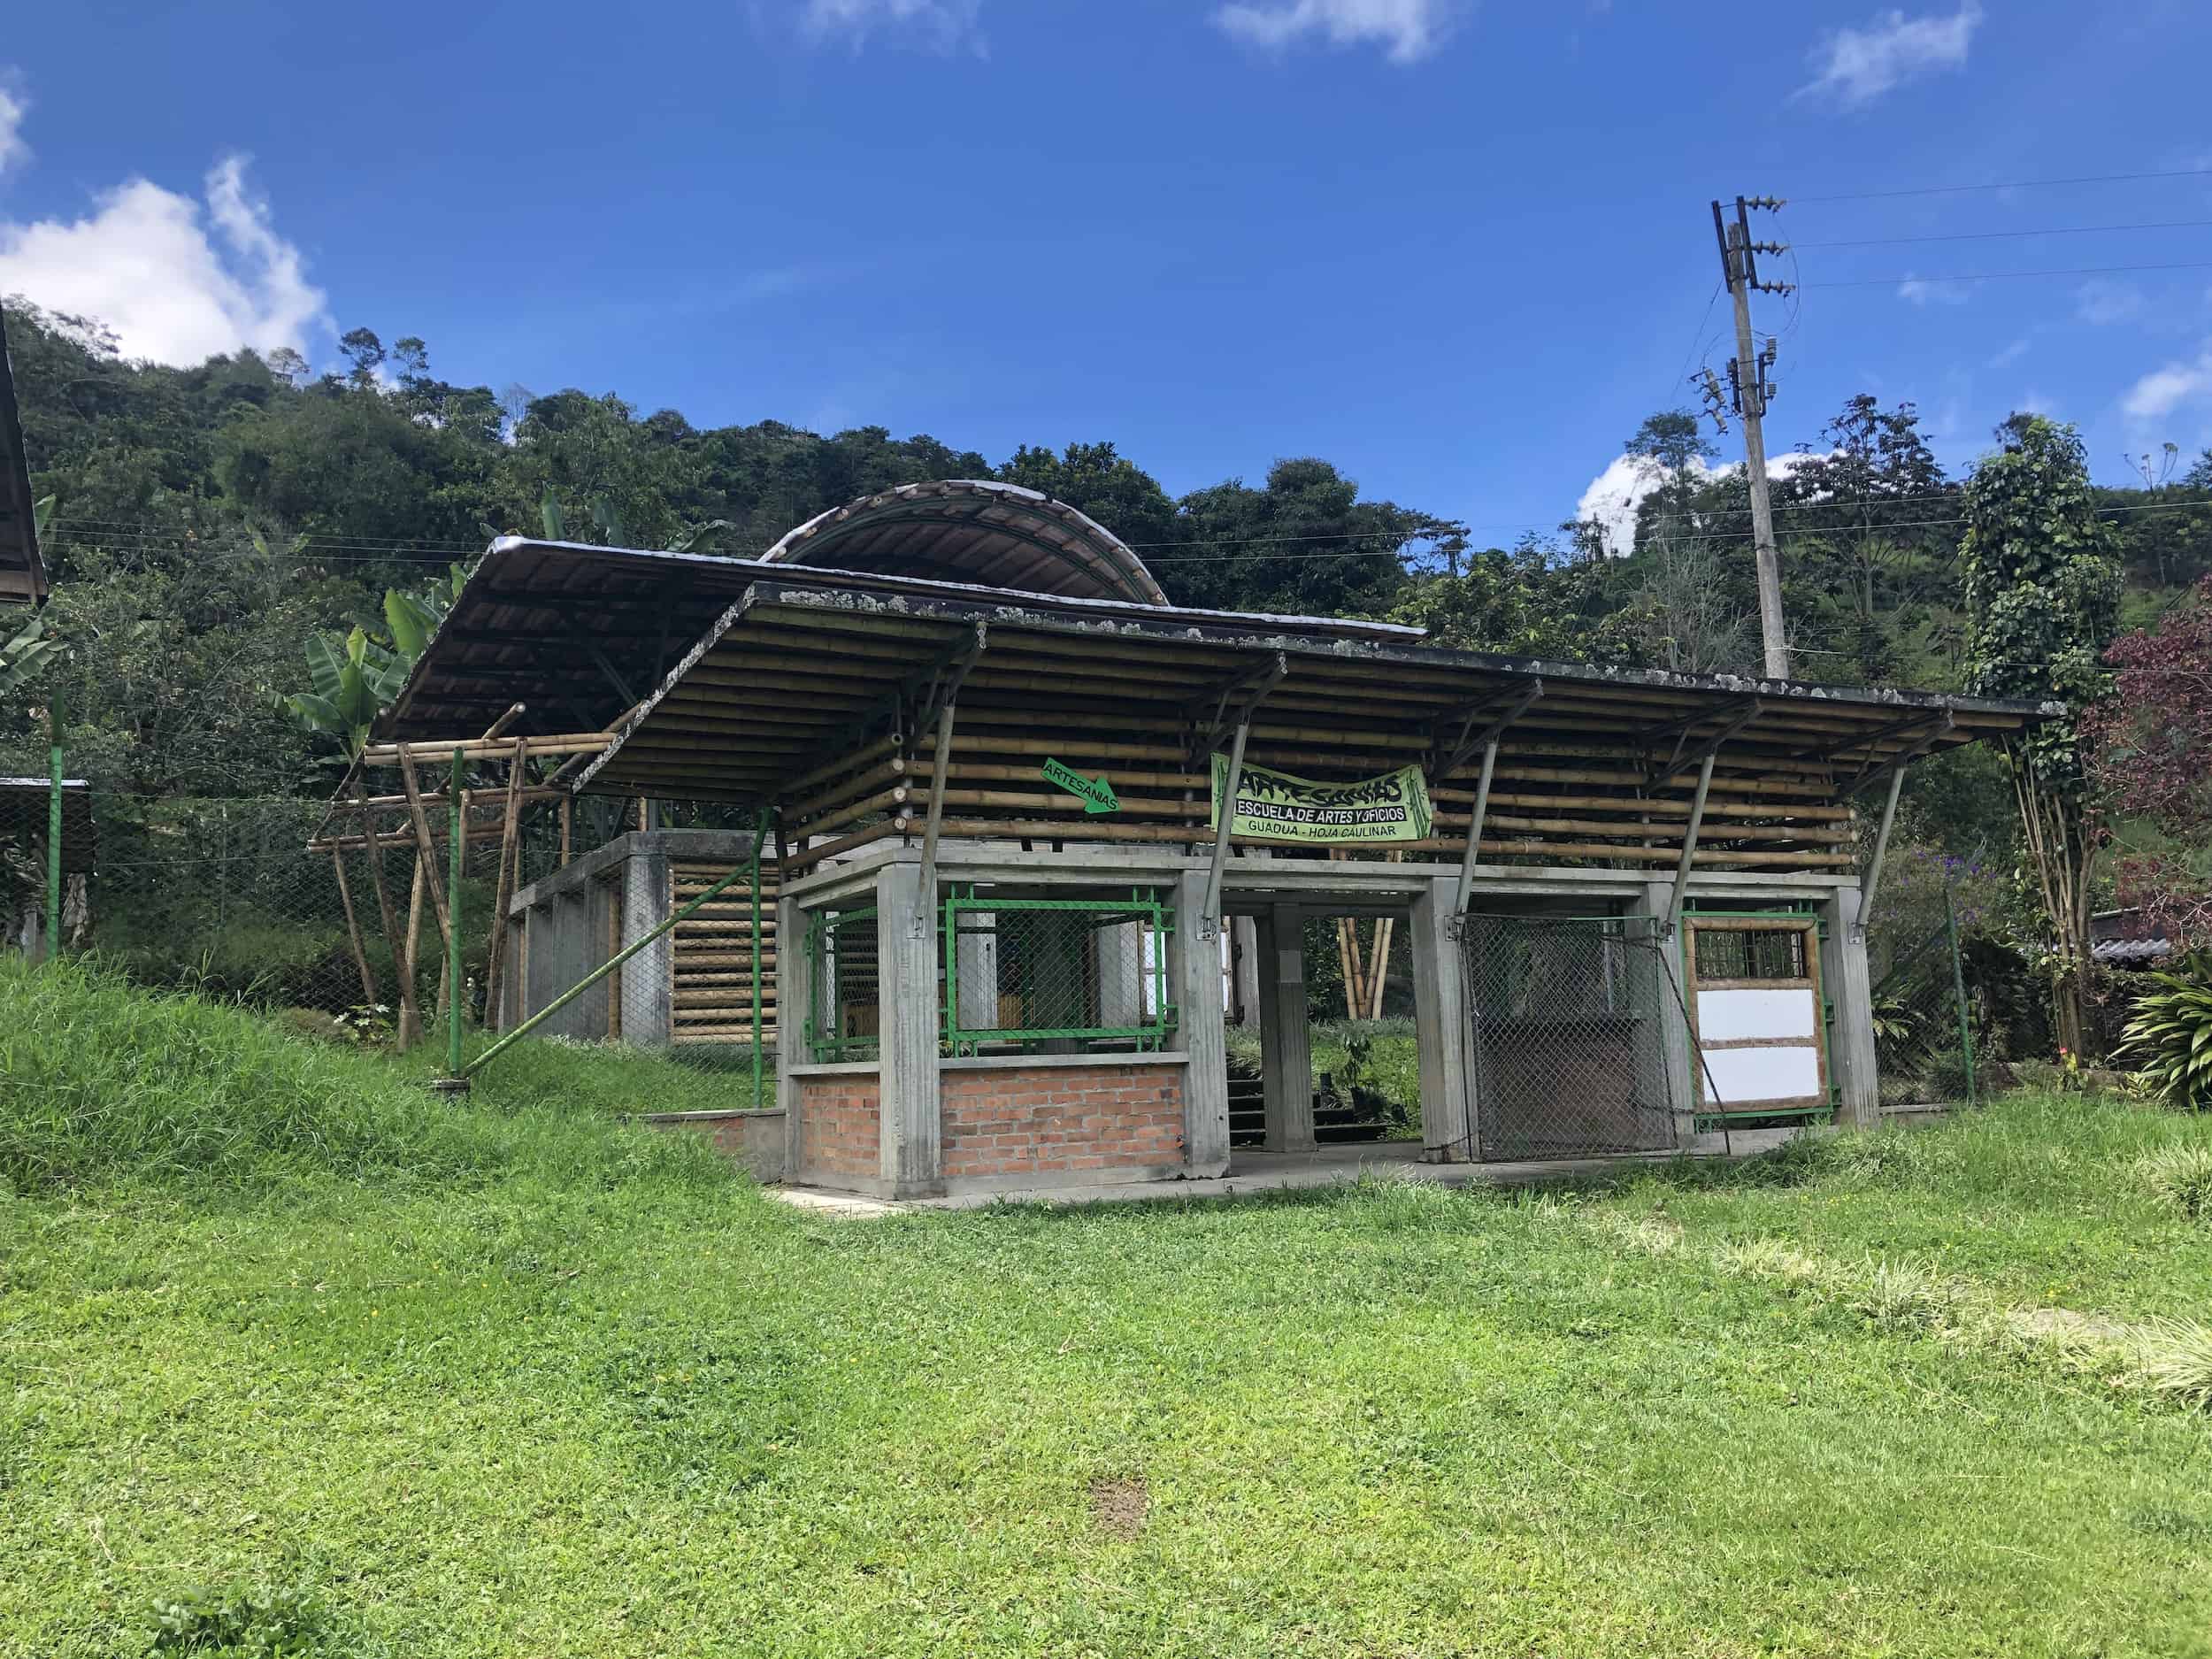 Interpretive center on the Bamboo and Guadua Educational Hike